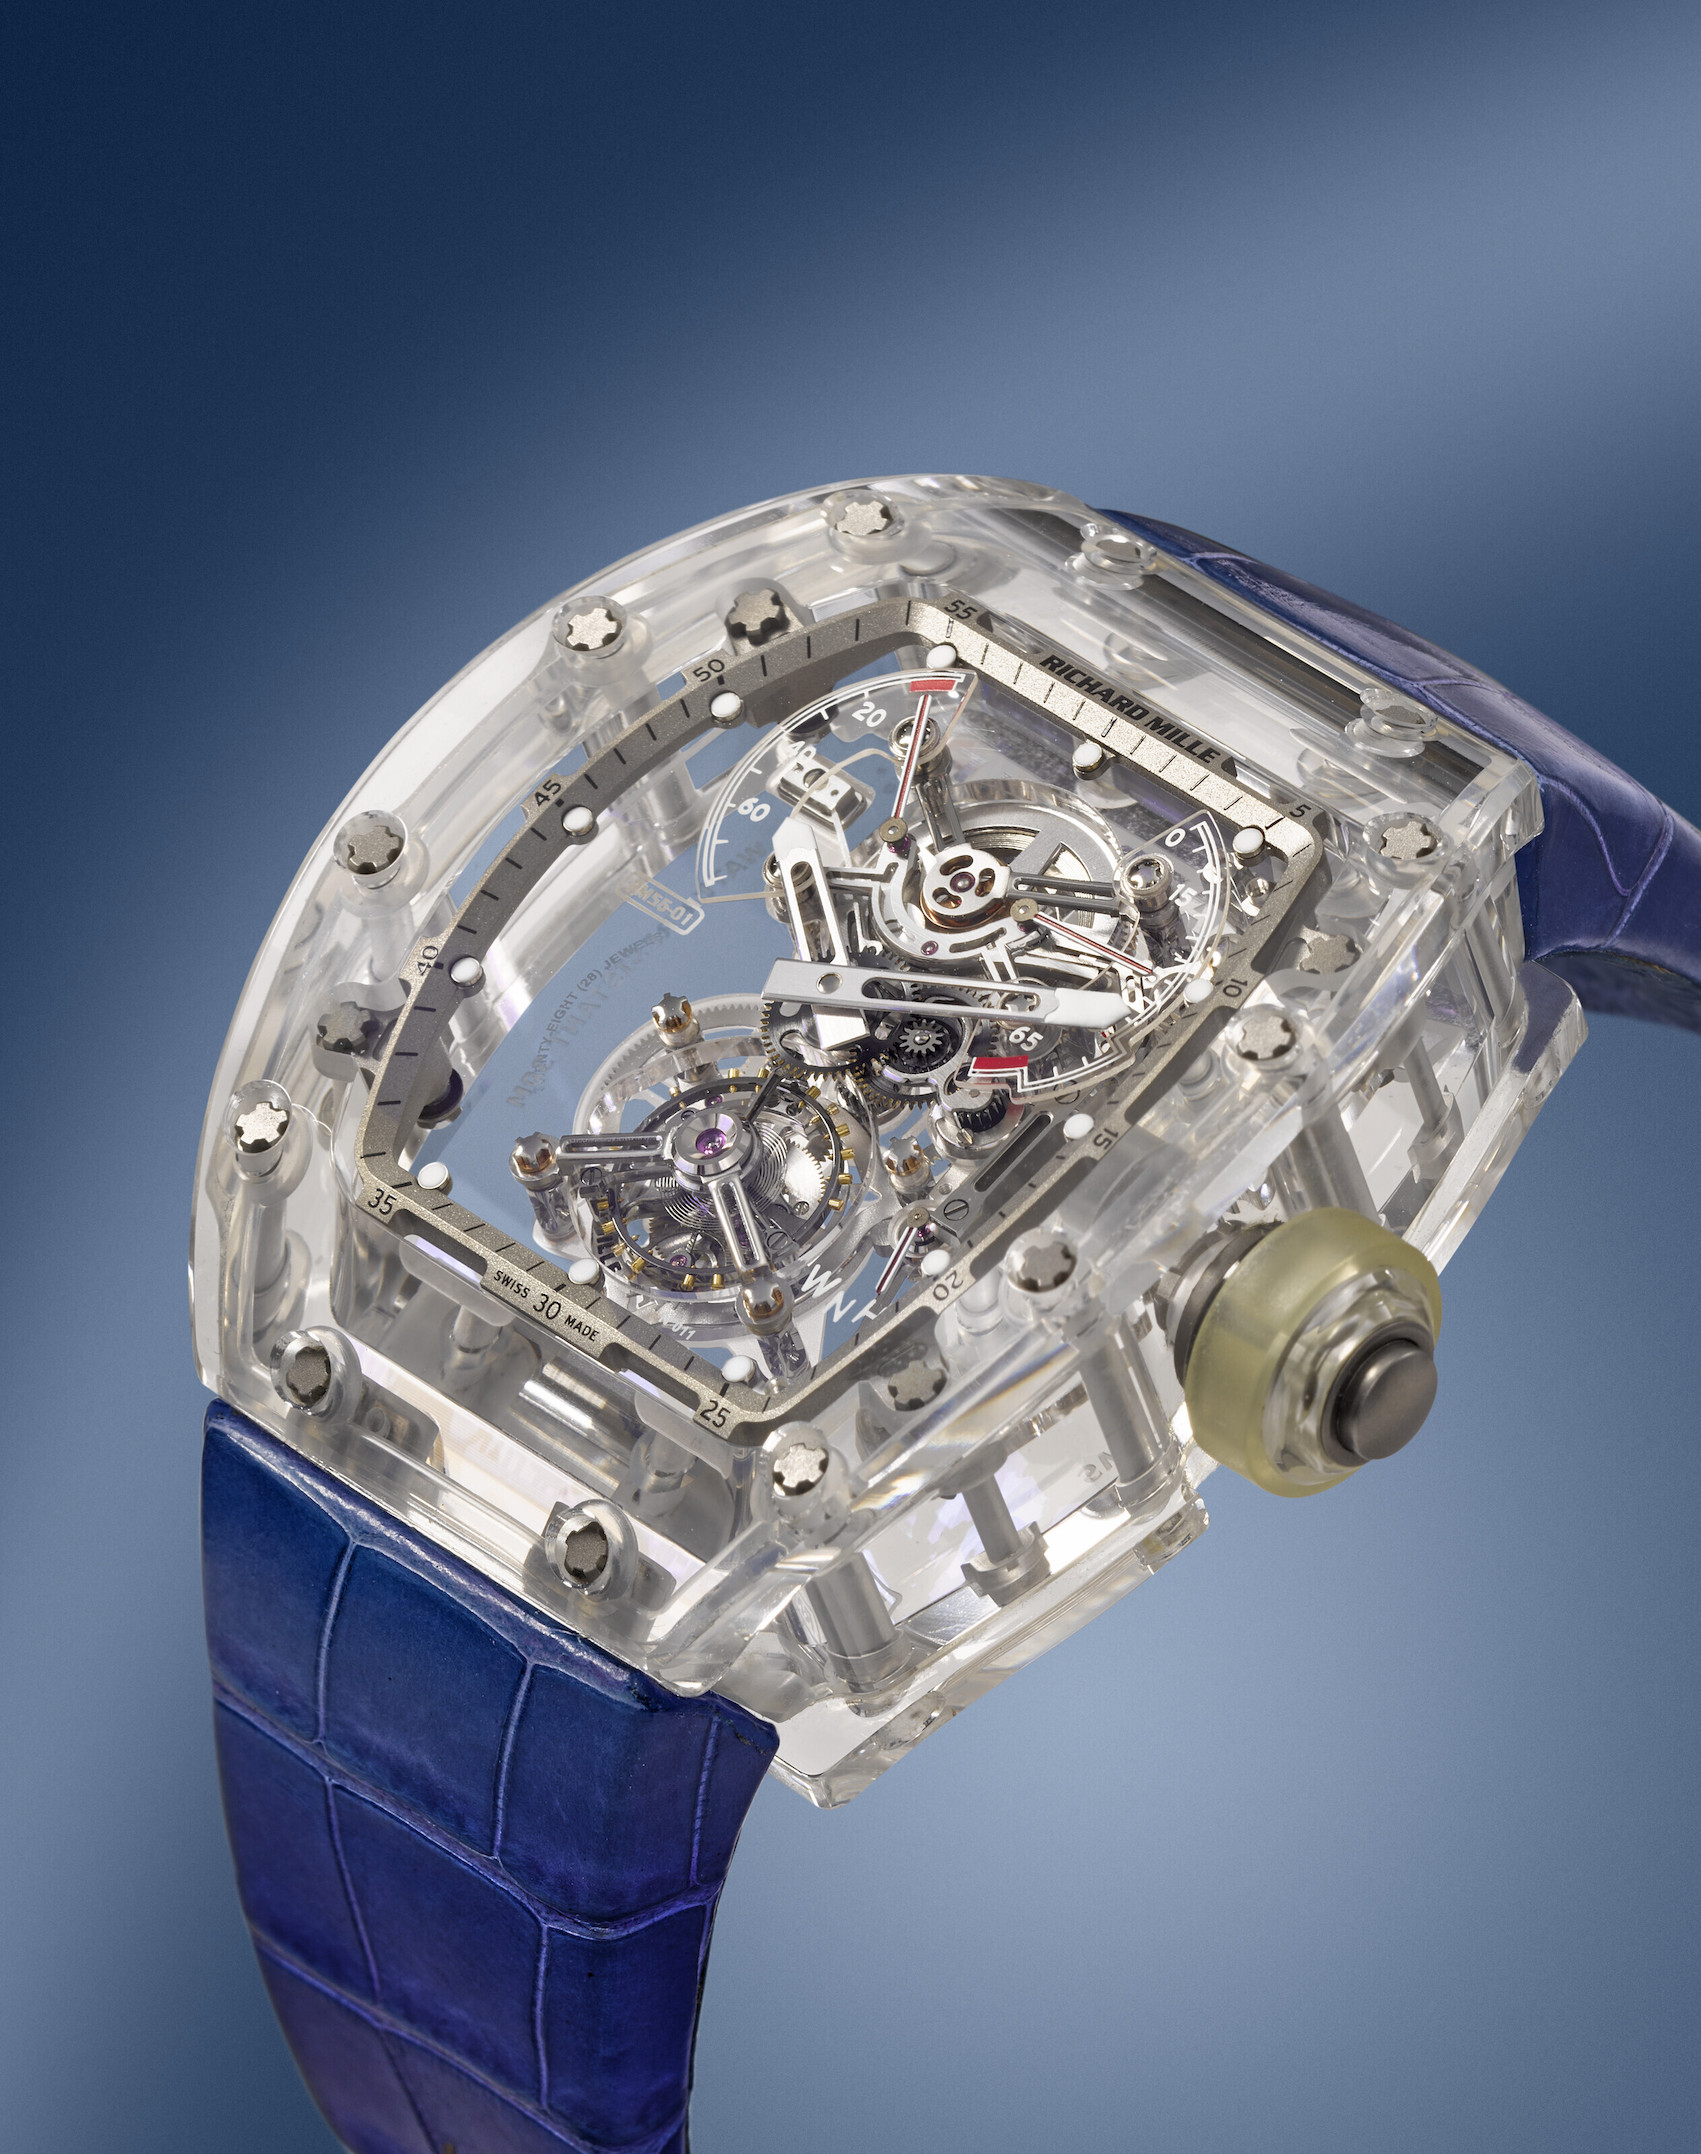 RICHARD MILLE. AN EXTRAORDINARY AND EXTREMELY RARE TRANSPARENT SAPPHIRE CRYSTAL AND TITANIUM LIMITED EDITION SKELETONIZED TOURBILLON WRISTWATCH WITH POWER RESERVE AND TORQUE INDICATOR